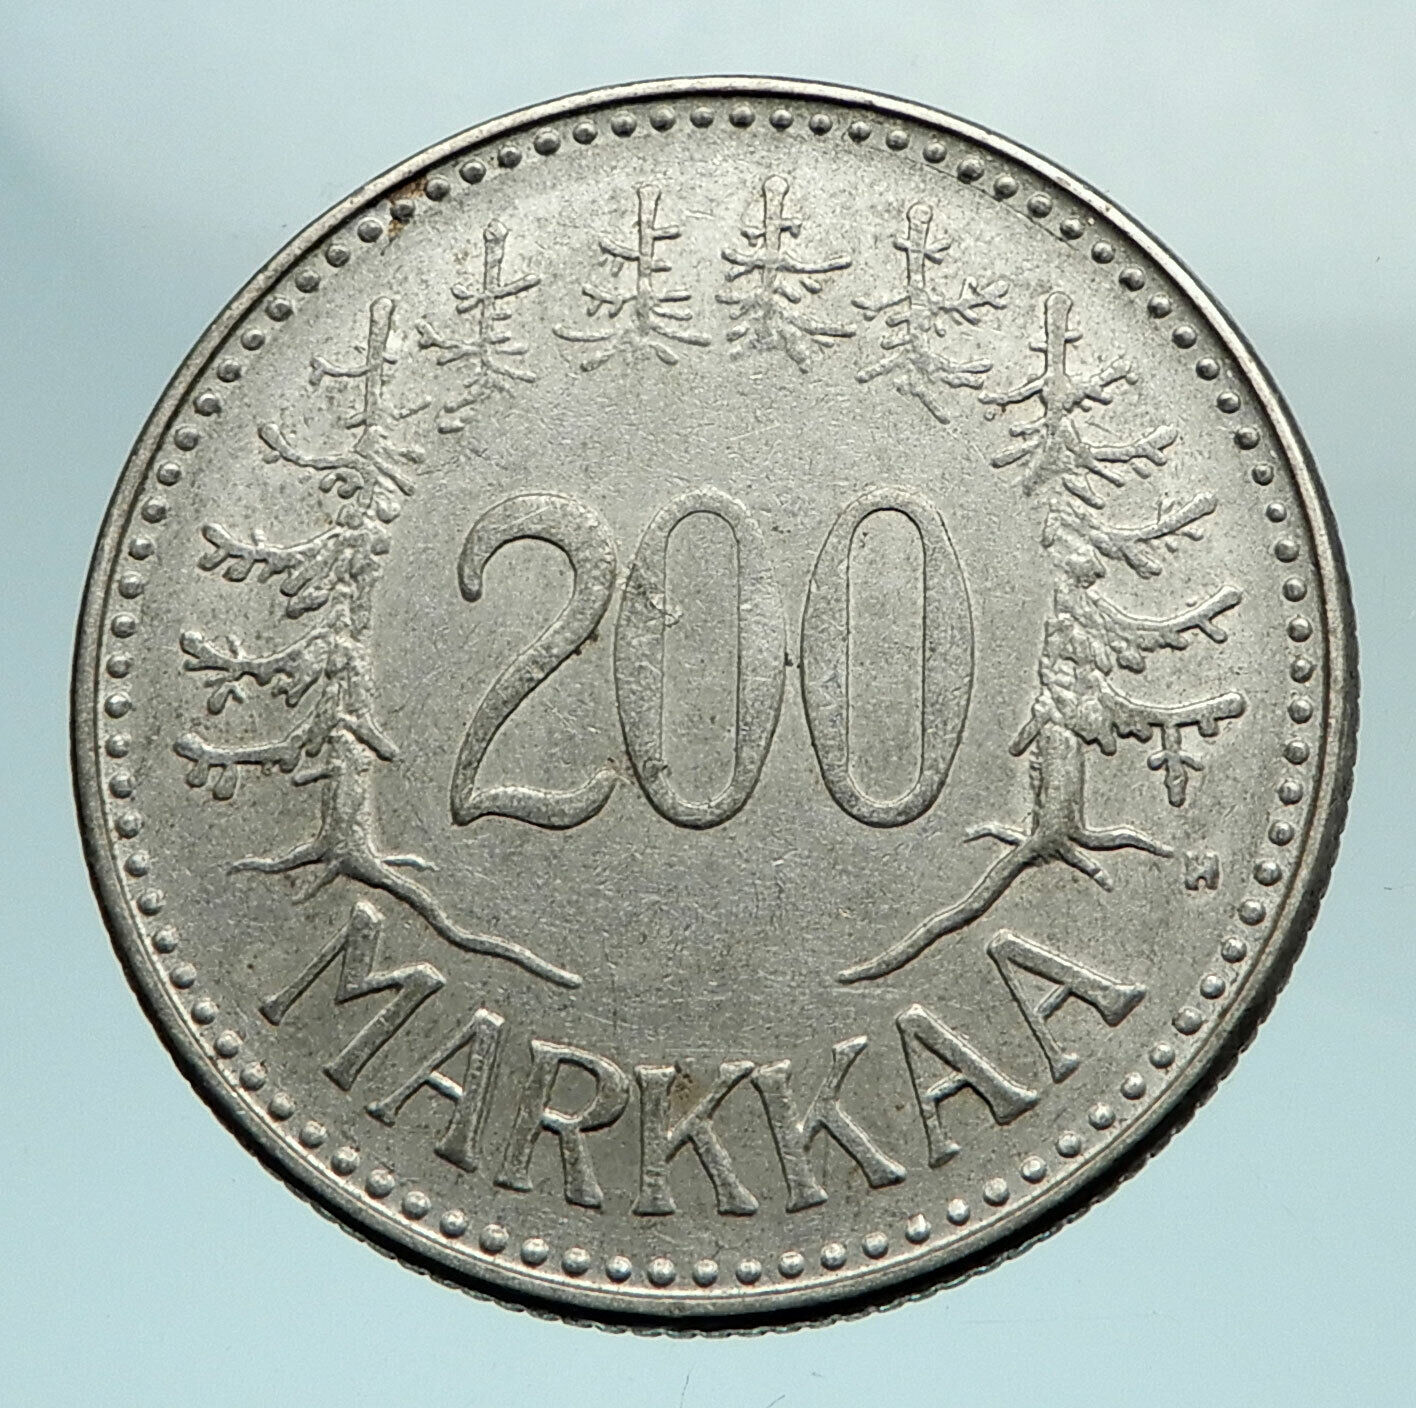 1957 FINLAND Trees Forest Pines Shield Genuine Silver 100 Markkaa Coin i79675